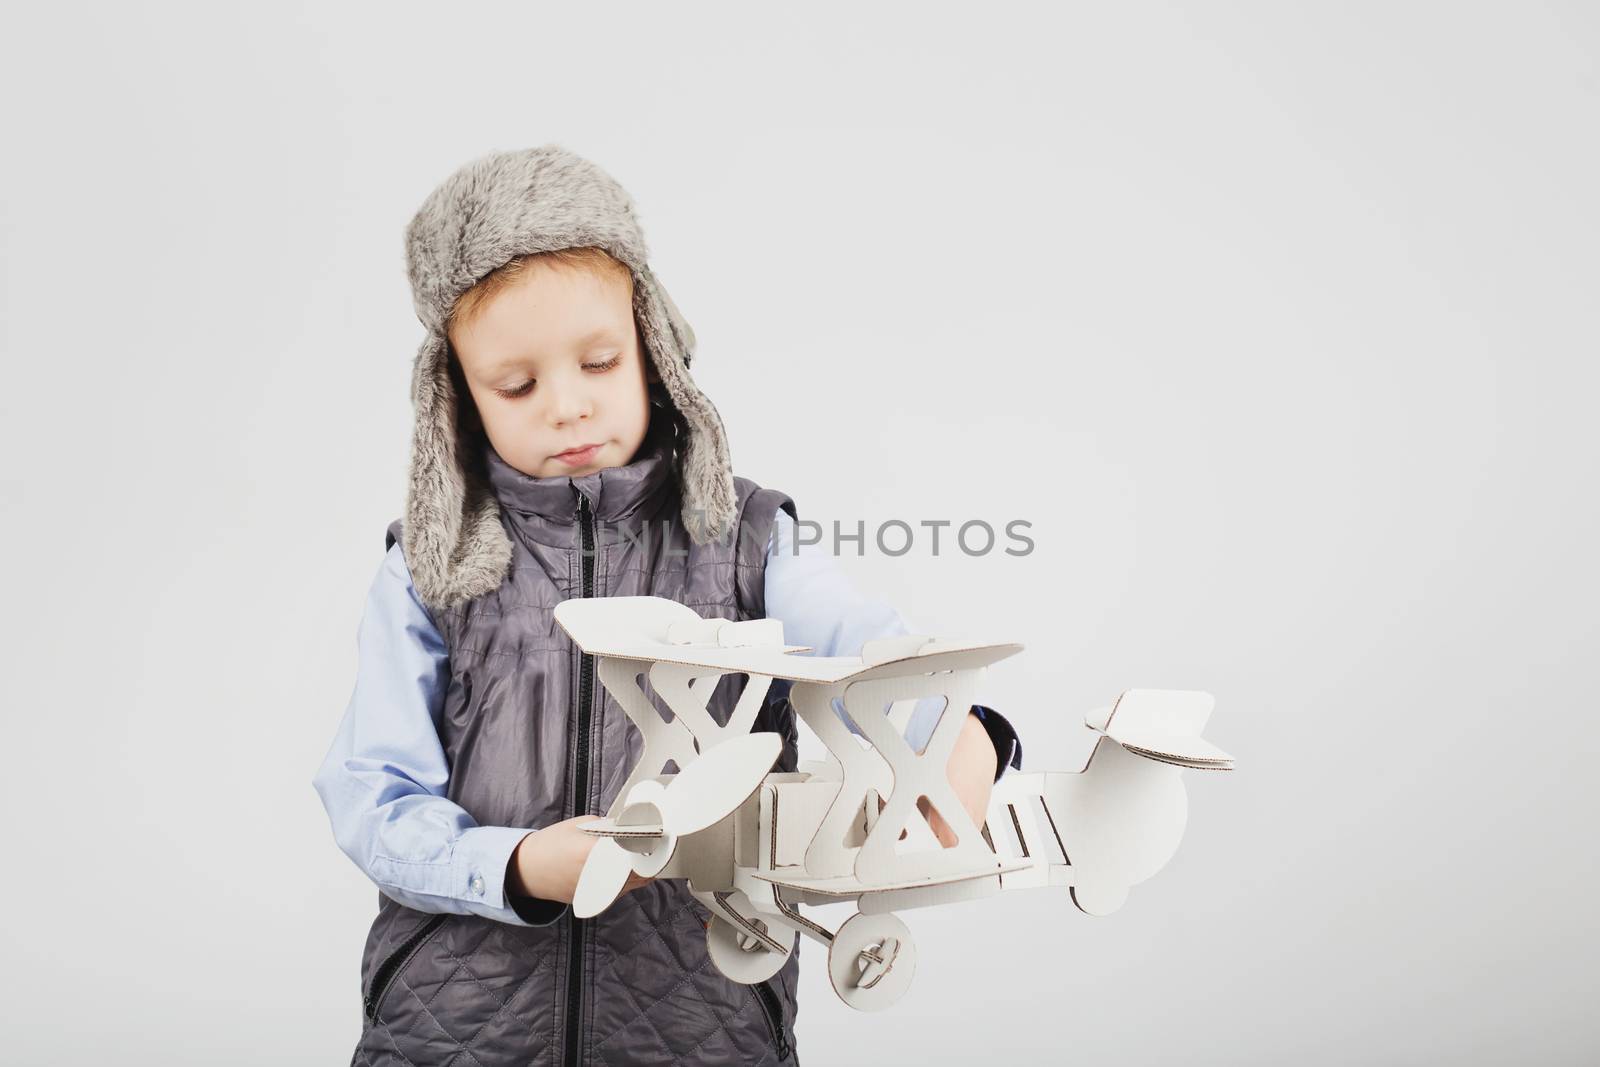 Child boy playing with paper toy airplane and dreaming of becoming a pilot against a white background